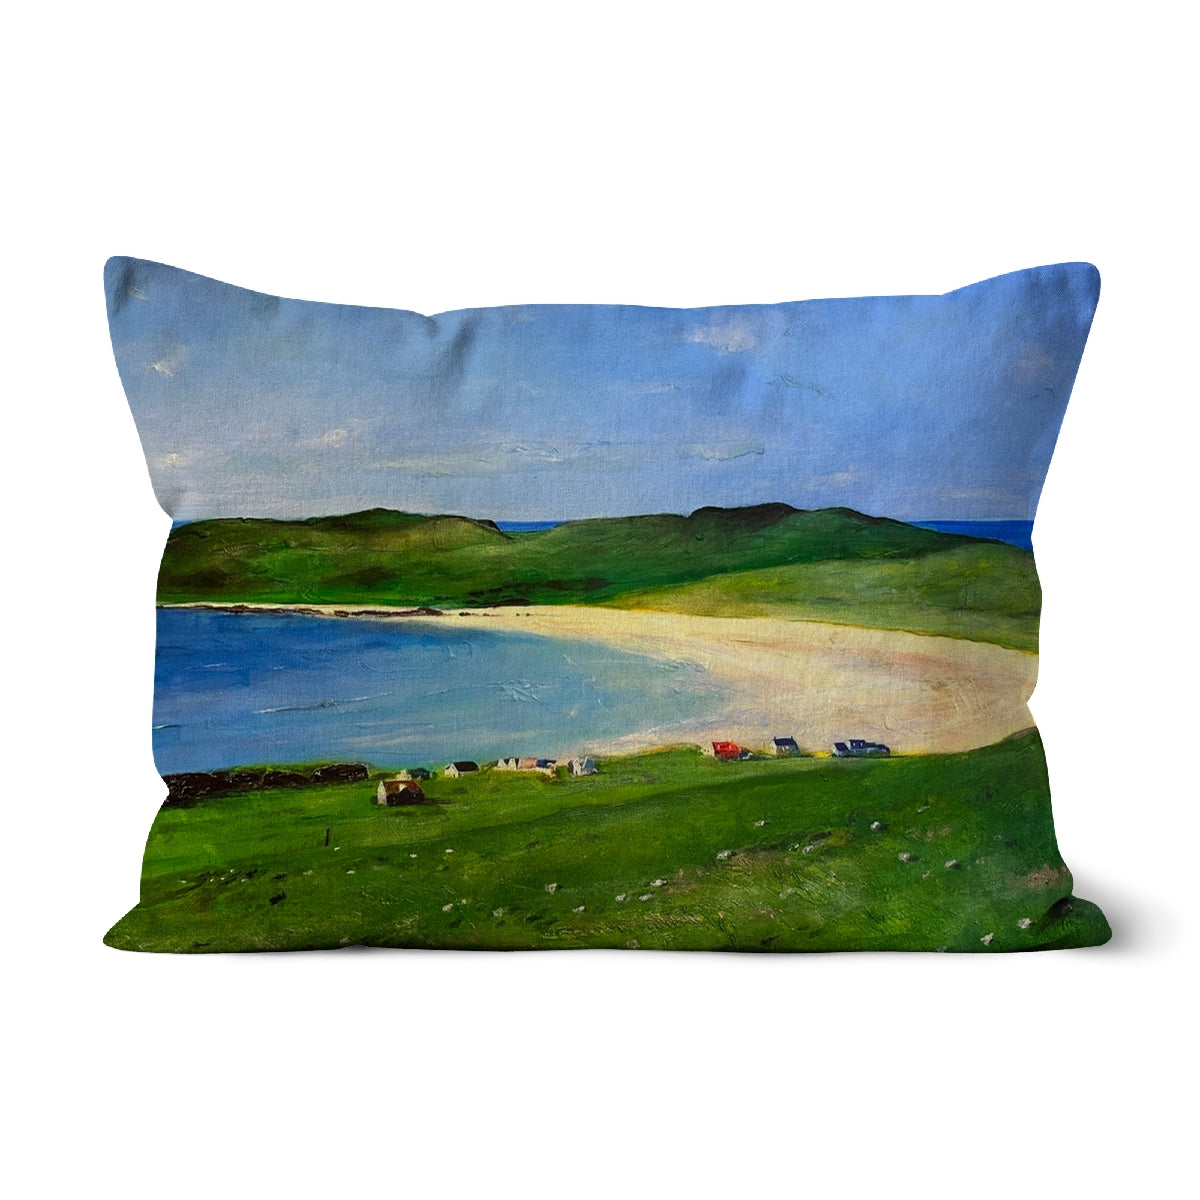 Balephuil Beach Tiree Art Gifts Cushion-Cushions-Hebridean Islands Art Gallery-Faux Suede-19"x13"-Paintings, Prints, Homeware, Art Gifts From Scotland By Scottish Artist Kevin Hunter